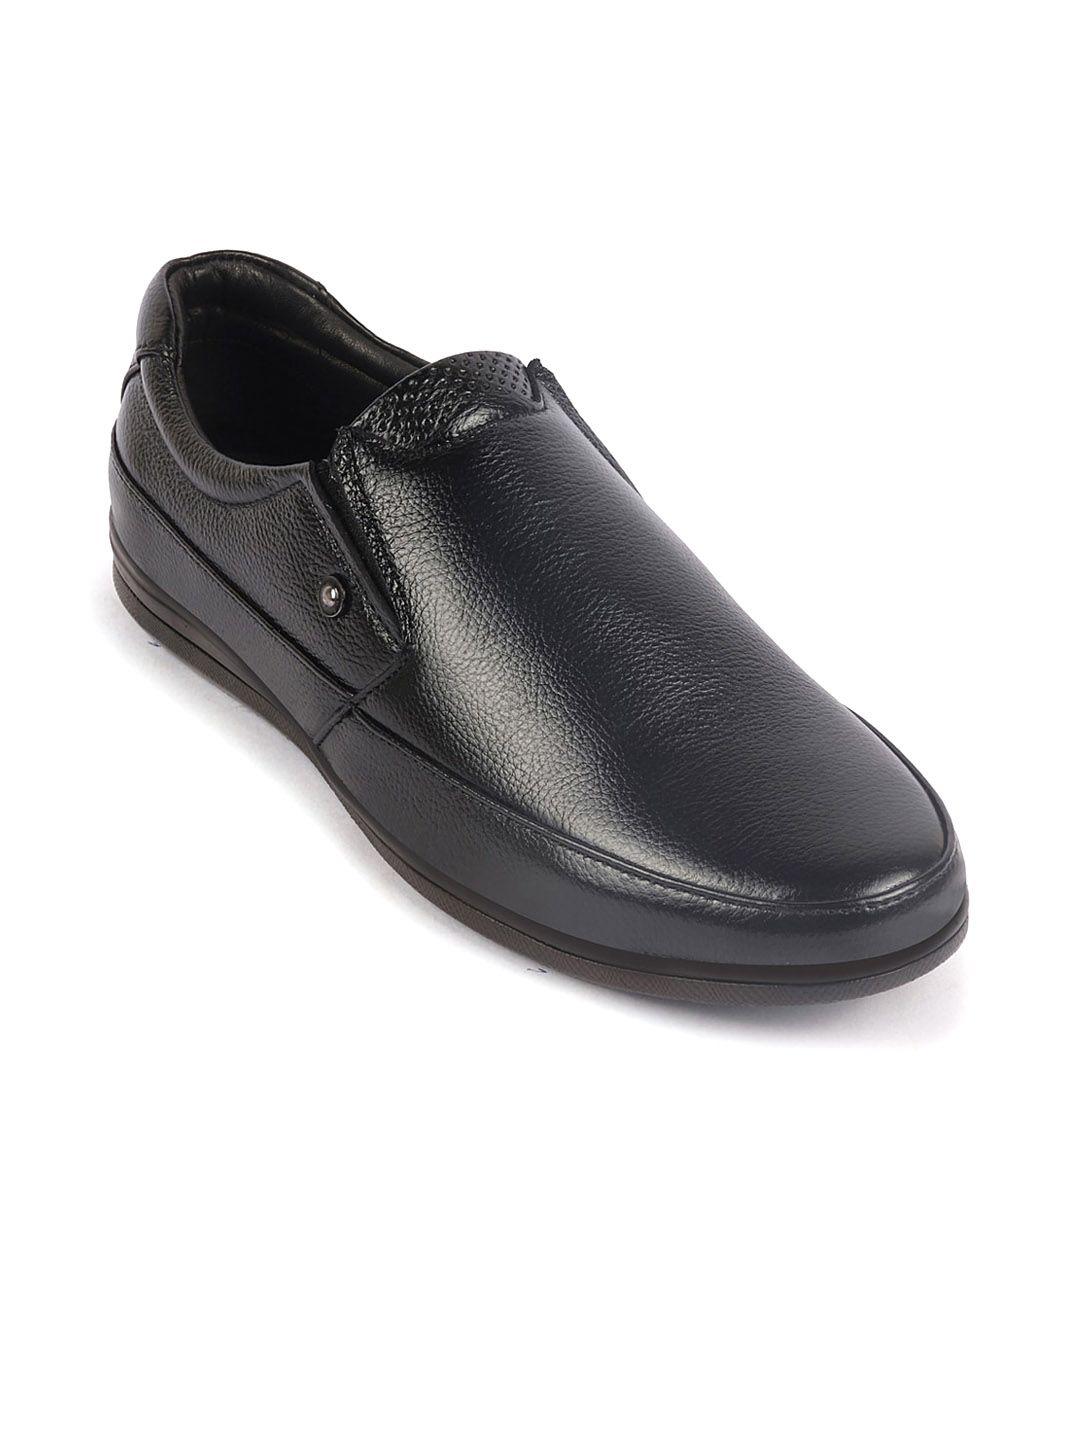 fausto-men-textured-leather-formal-slip-on-shoes